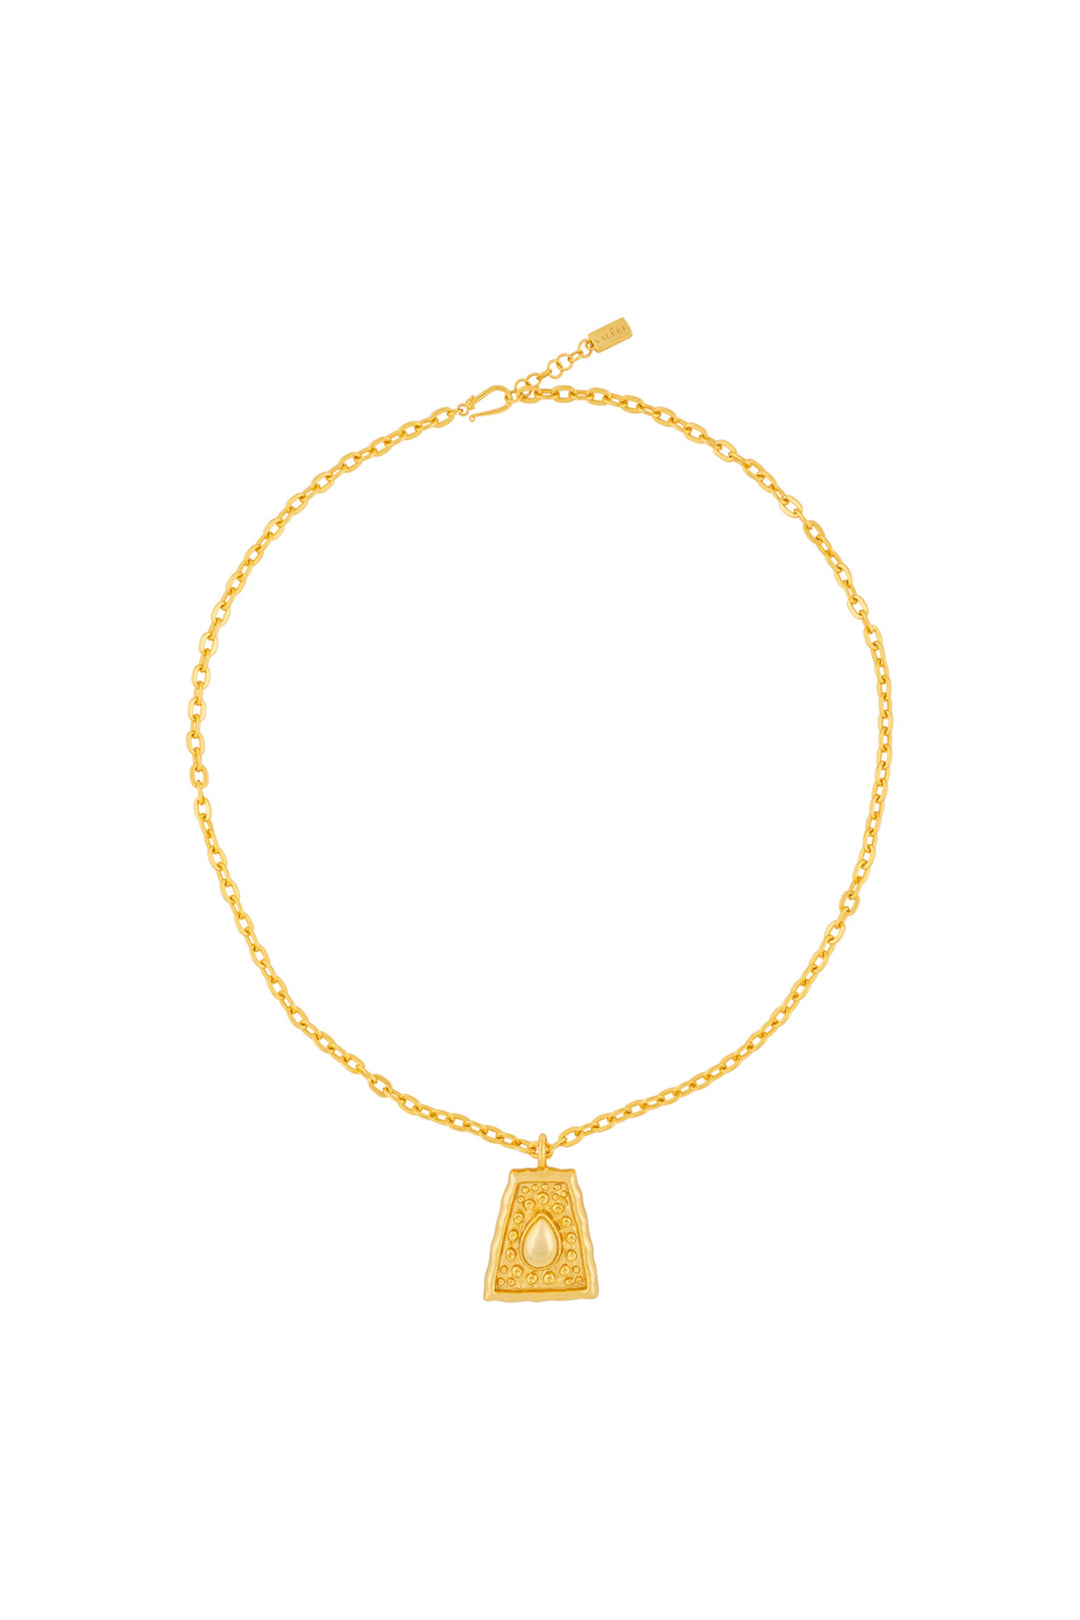 Valere Mayan Necklace - Gold